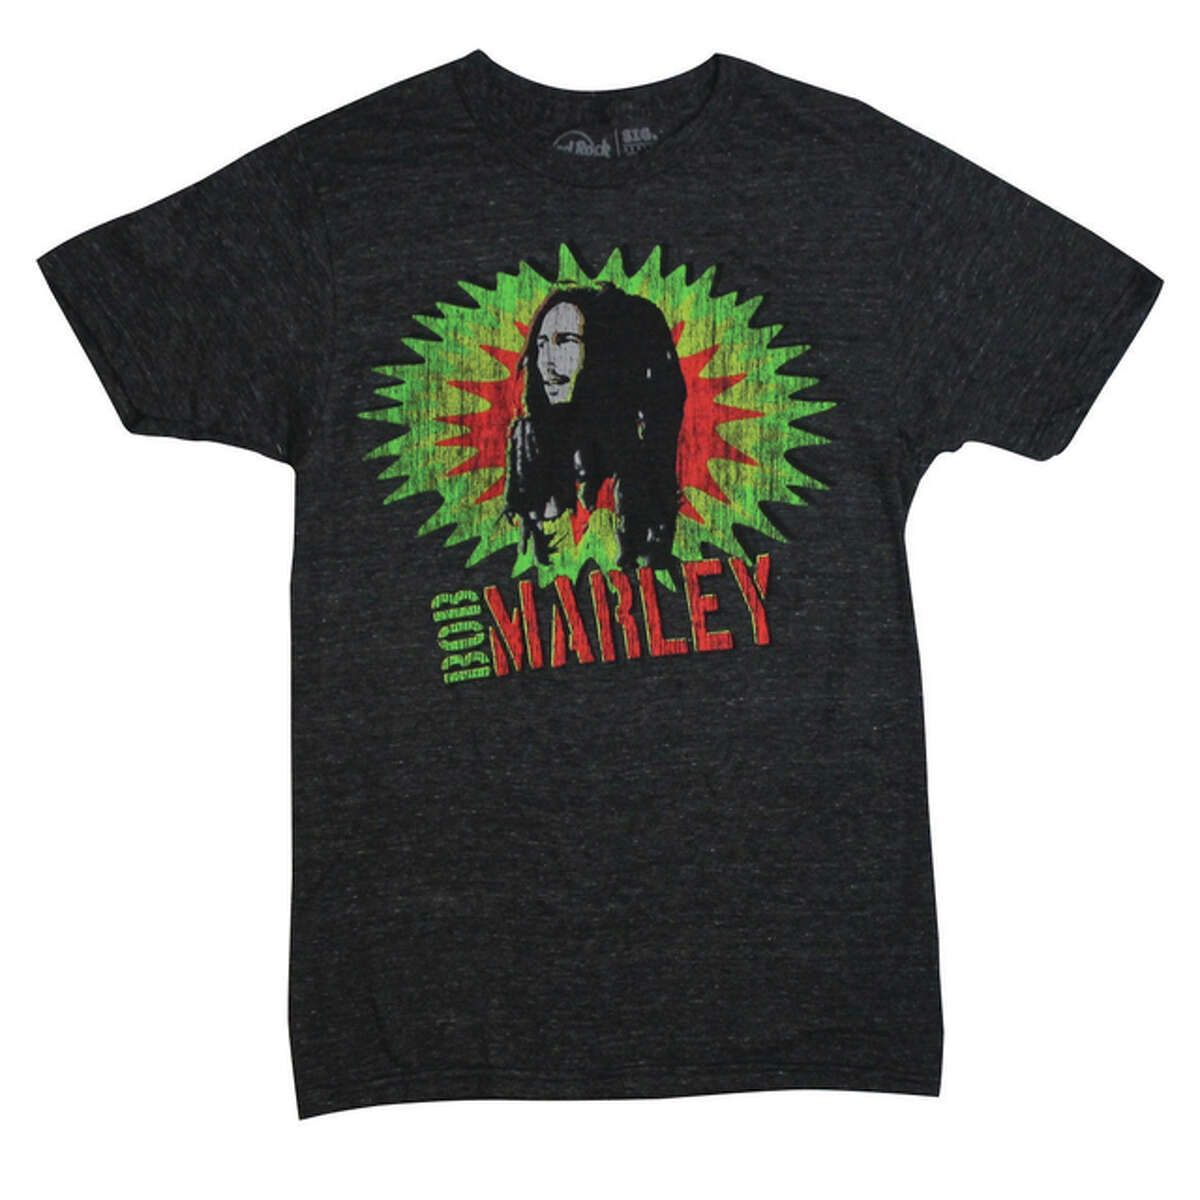 Hard Rock’s Bob Marley Signature Series shirt from the Hard Rock’s new Bob Marley Signature Series: Edition 34 in support of charity partner City of Hope.